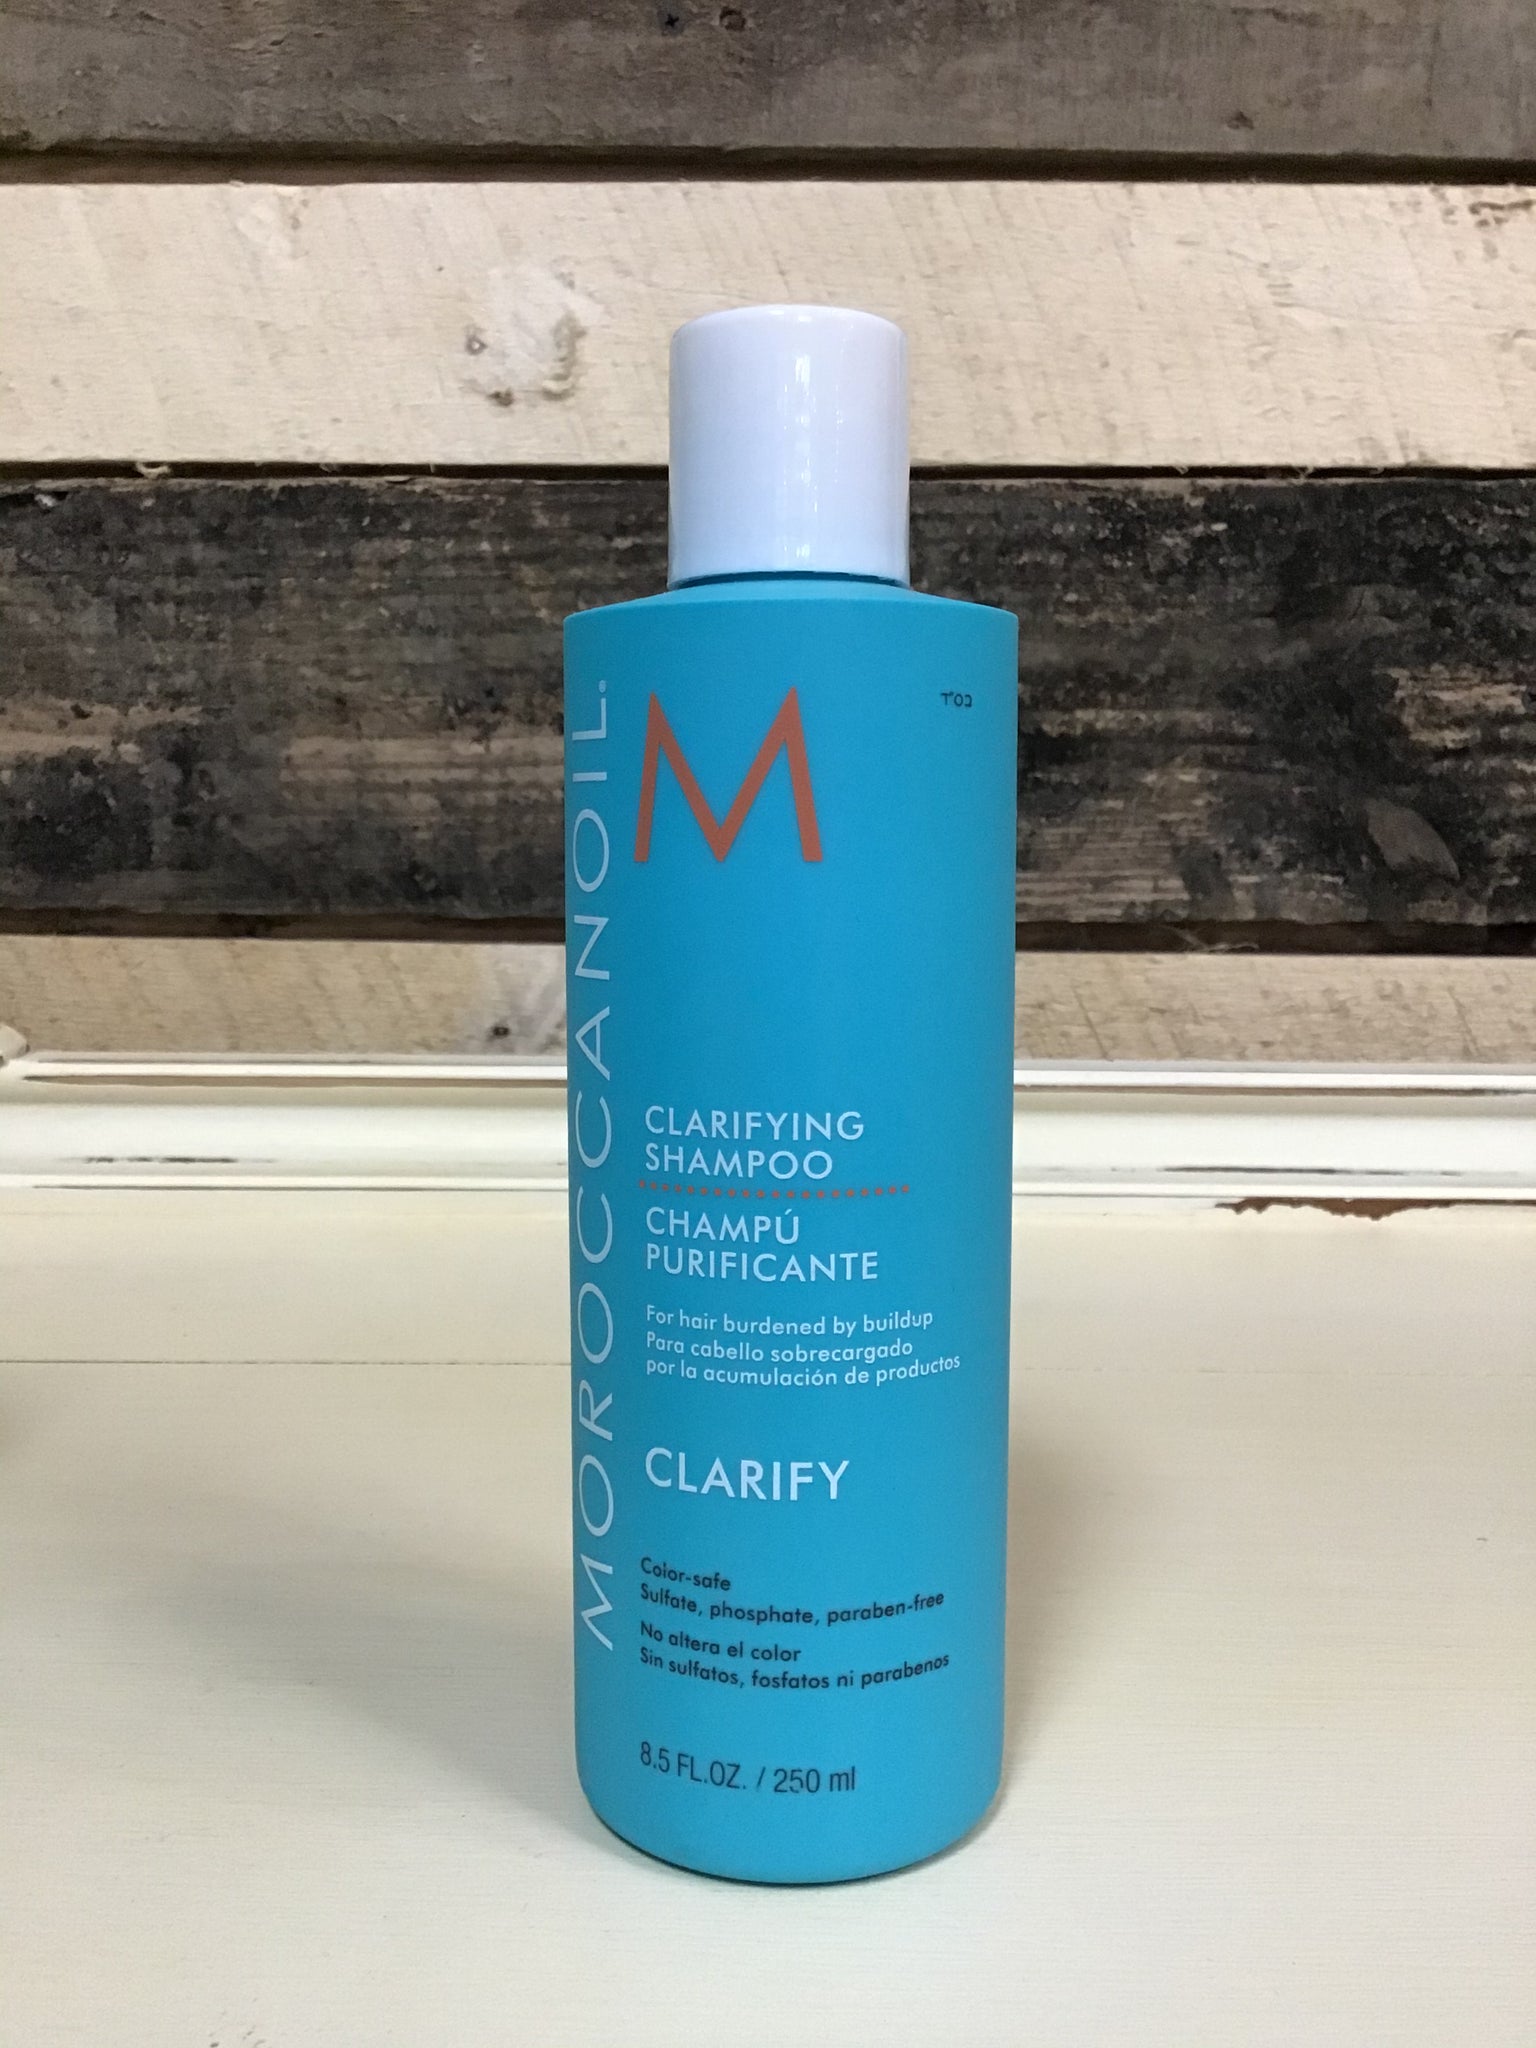 Moroccan oil clarifying shampoo – The Parlor On Market